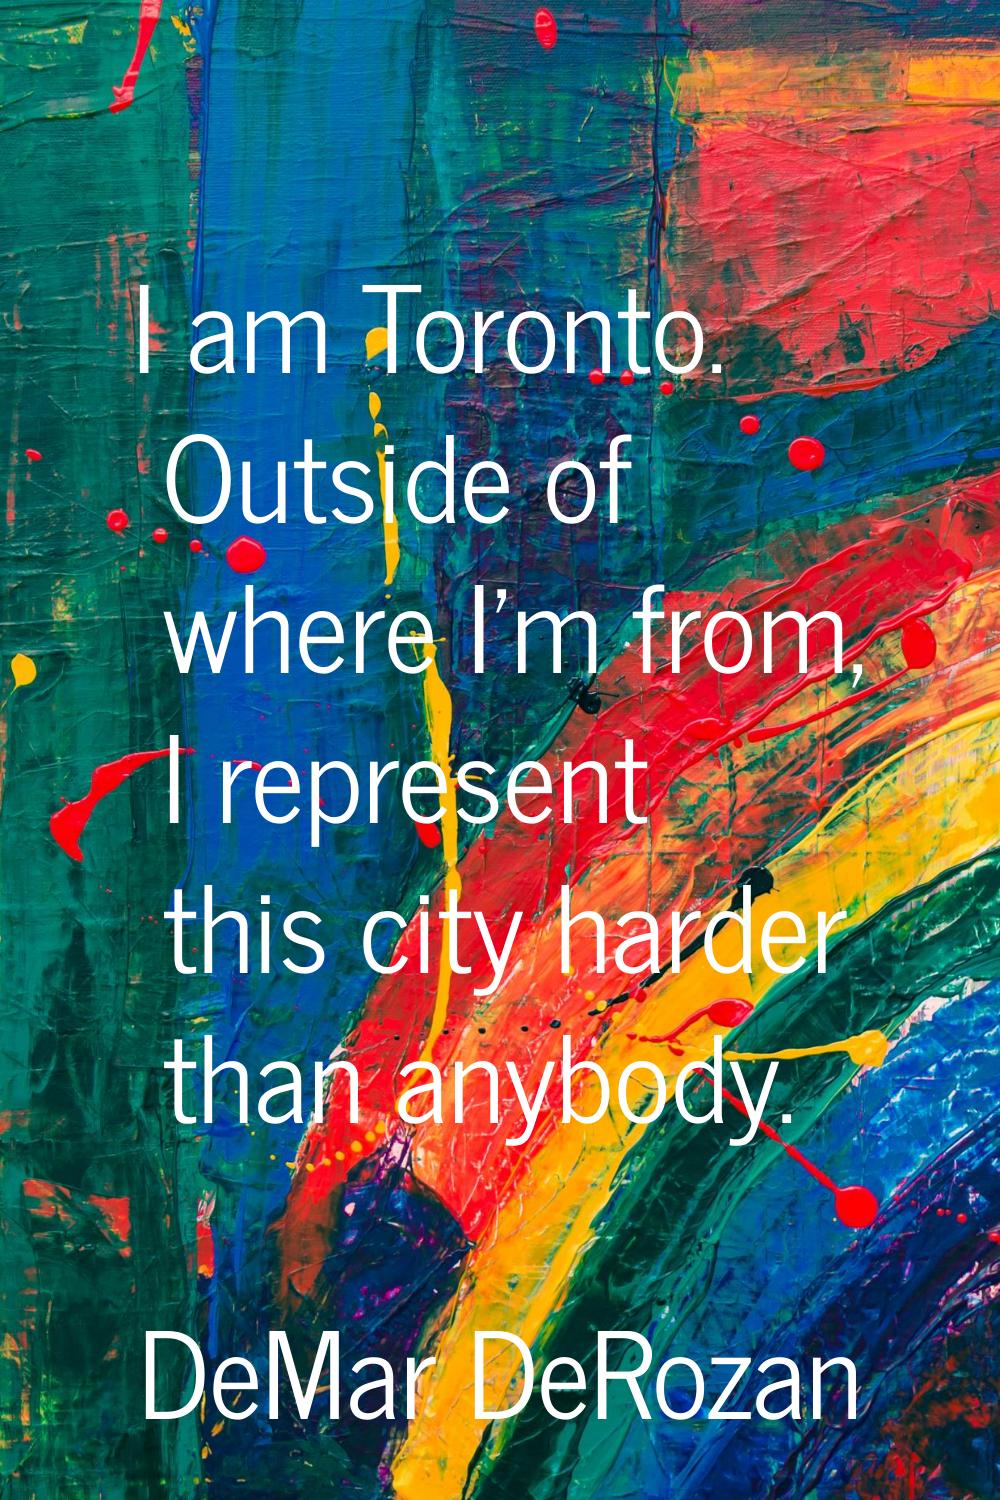 I am Toronto. Outside of where I'm from, I represent this city harder than anybody.